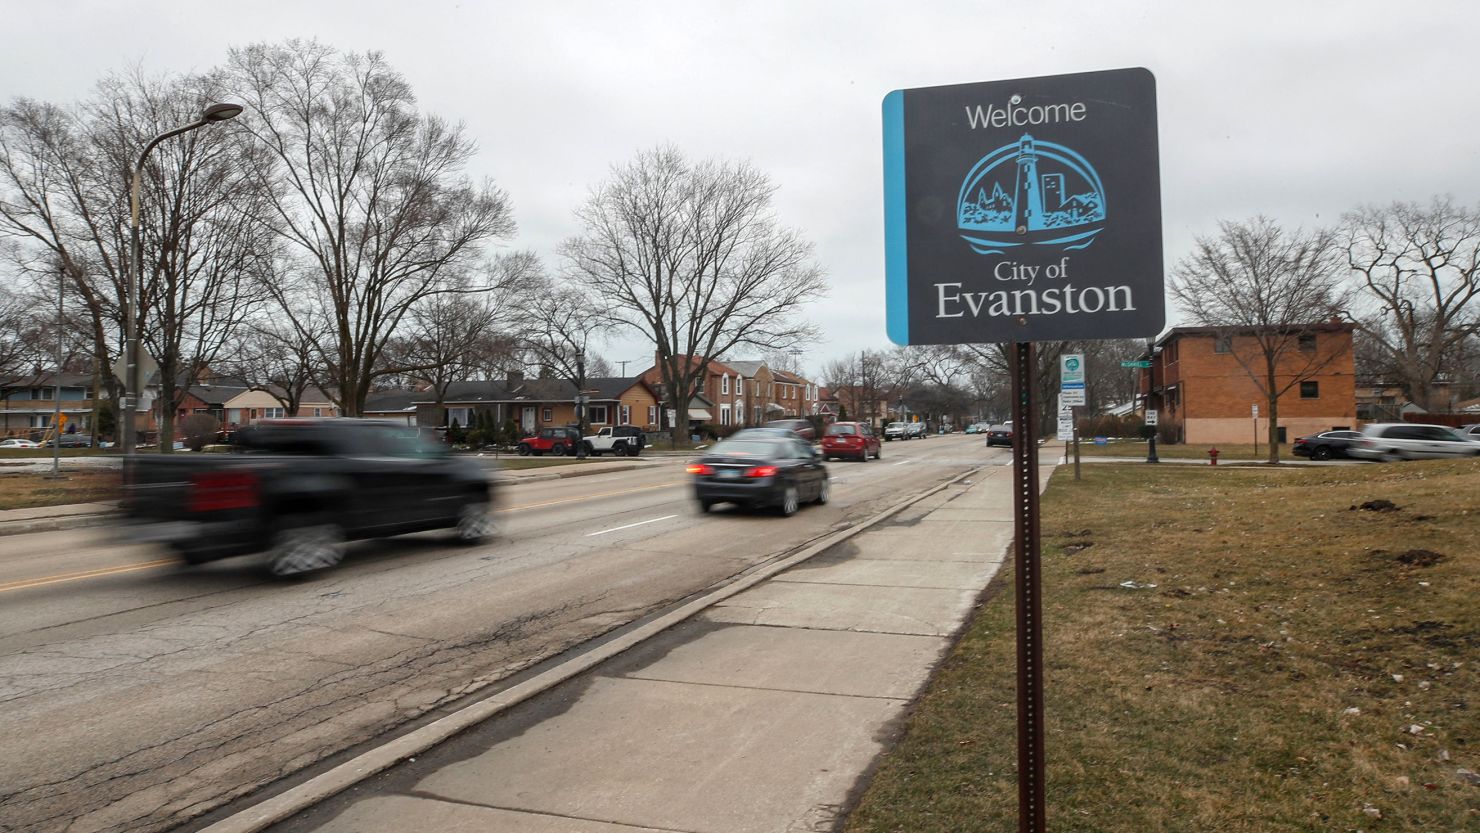 Cars drive past a sign welcoming people to the city of in Evanston, Illinois, on March 16, 2021. A conservative legal group is challenging the constitutionality of the city's reparations program.